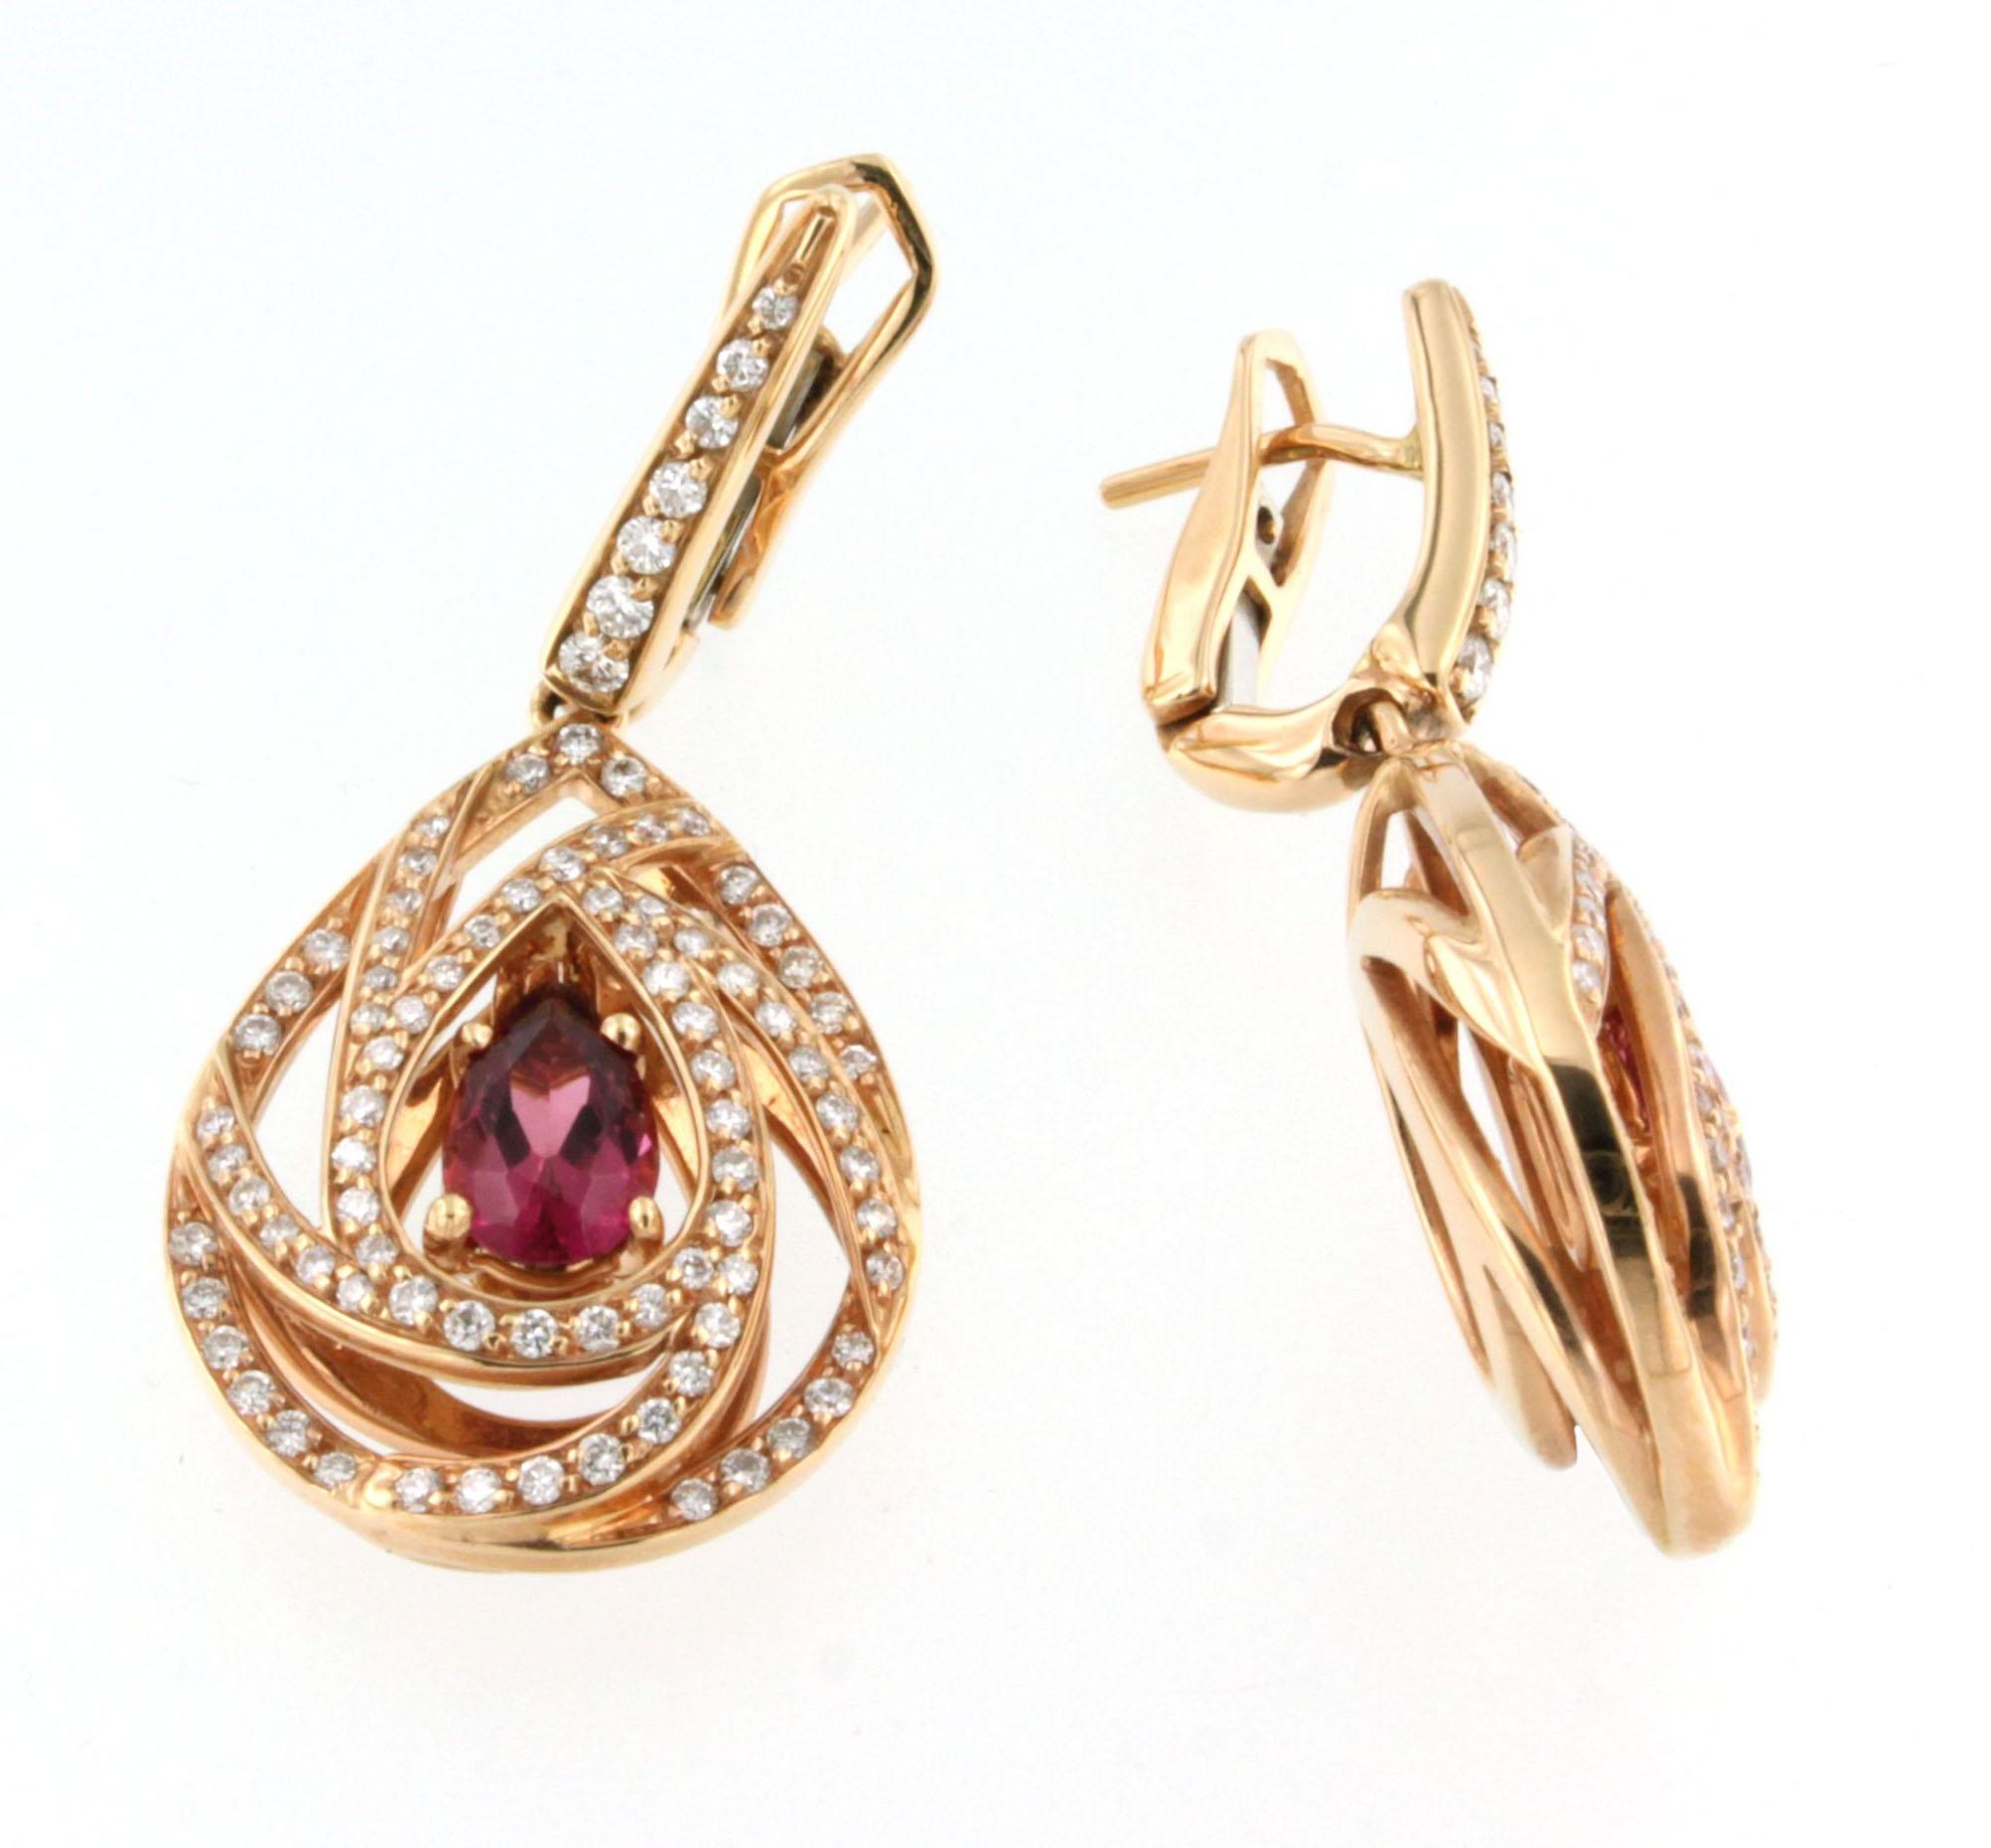 Earrings in 18kt rose gold with Pink Tourmaline (drop cut, ct 1.87) and white Diamonds G/VS ct 1.14